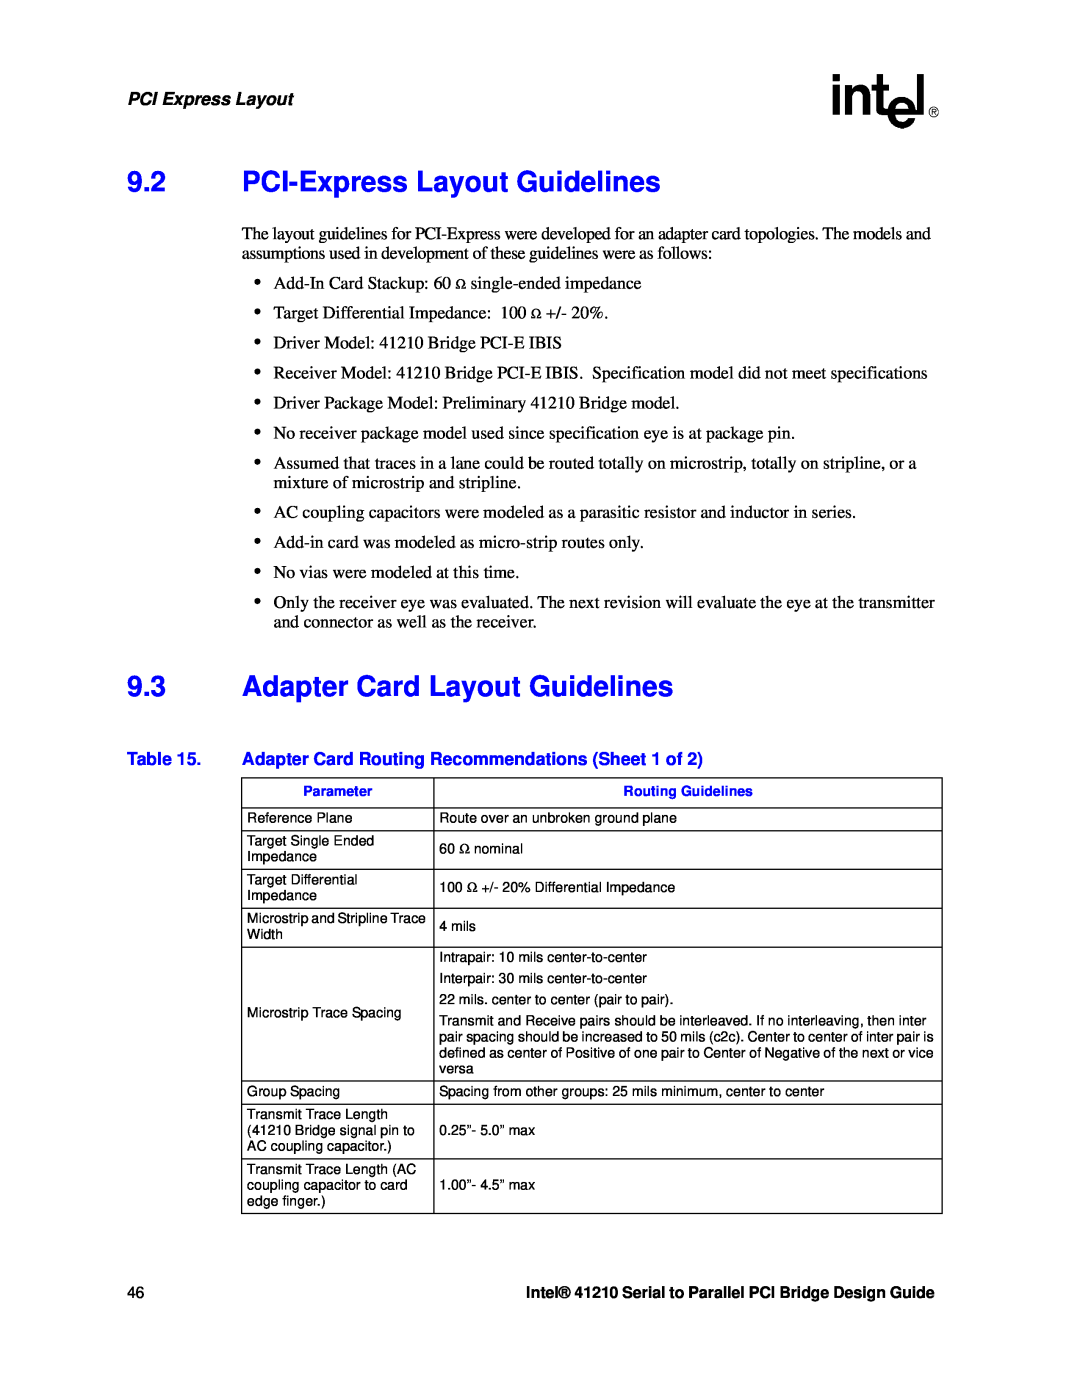 Intel 41210 manual PCI-Express Layout Guidelines, Adapter Card Layout Guidelines, PCI Express Layout 